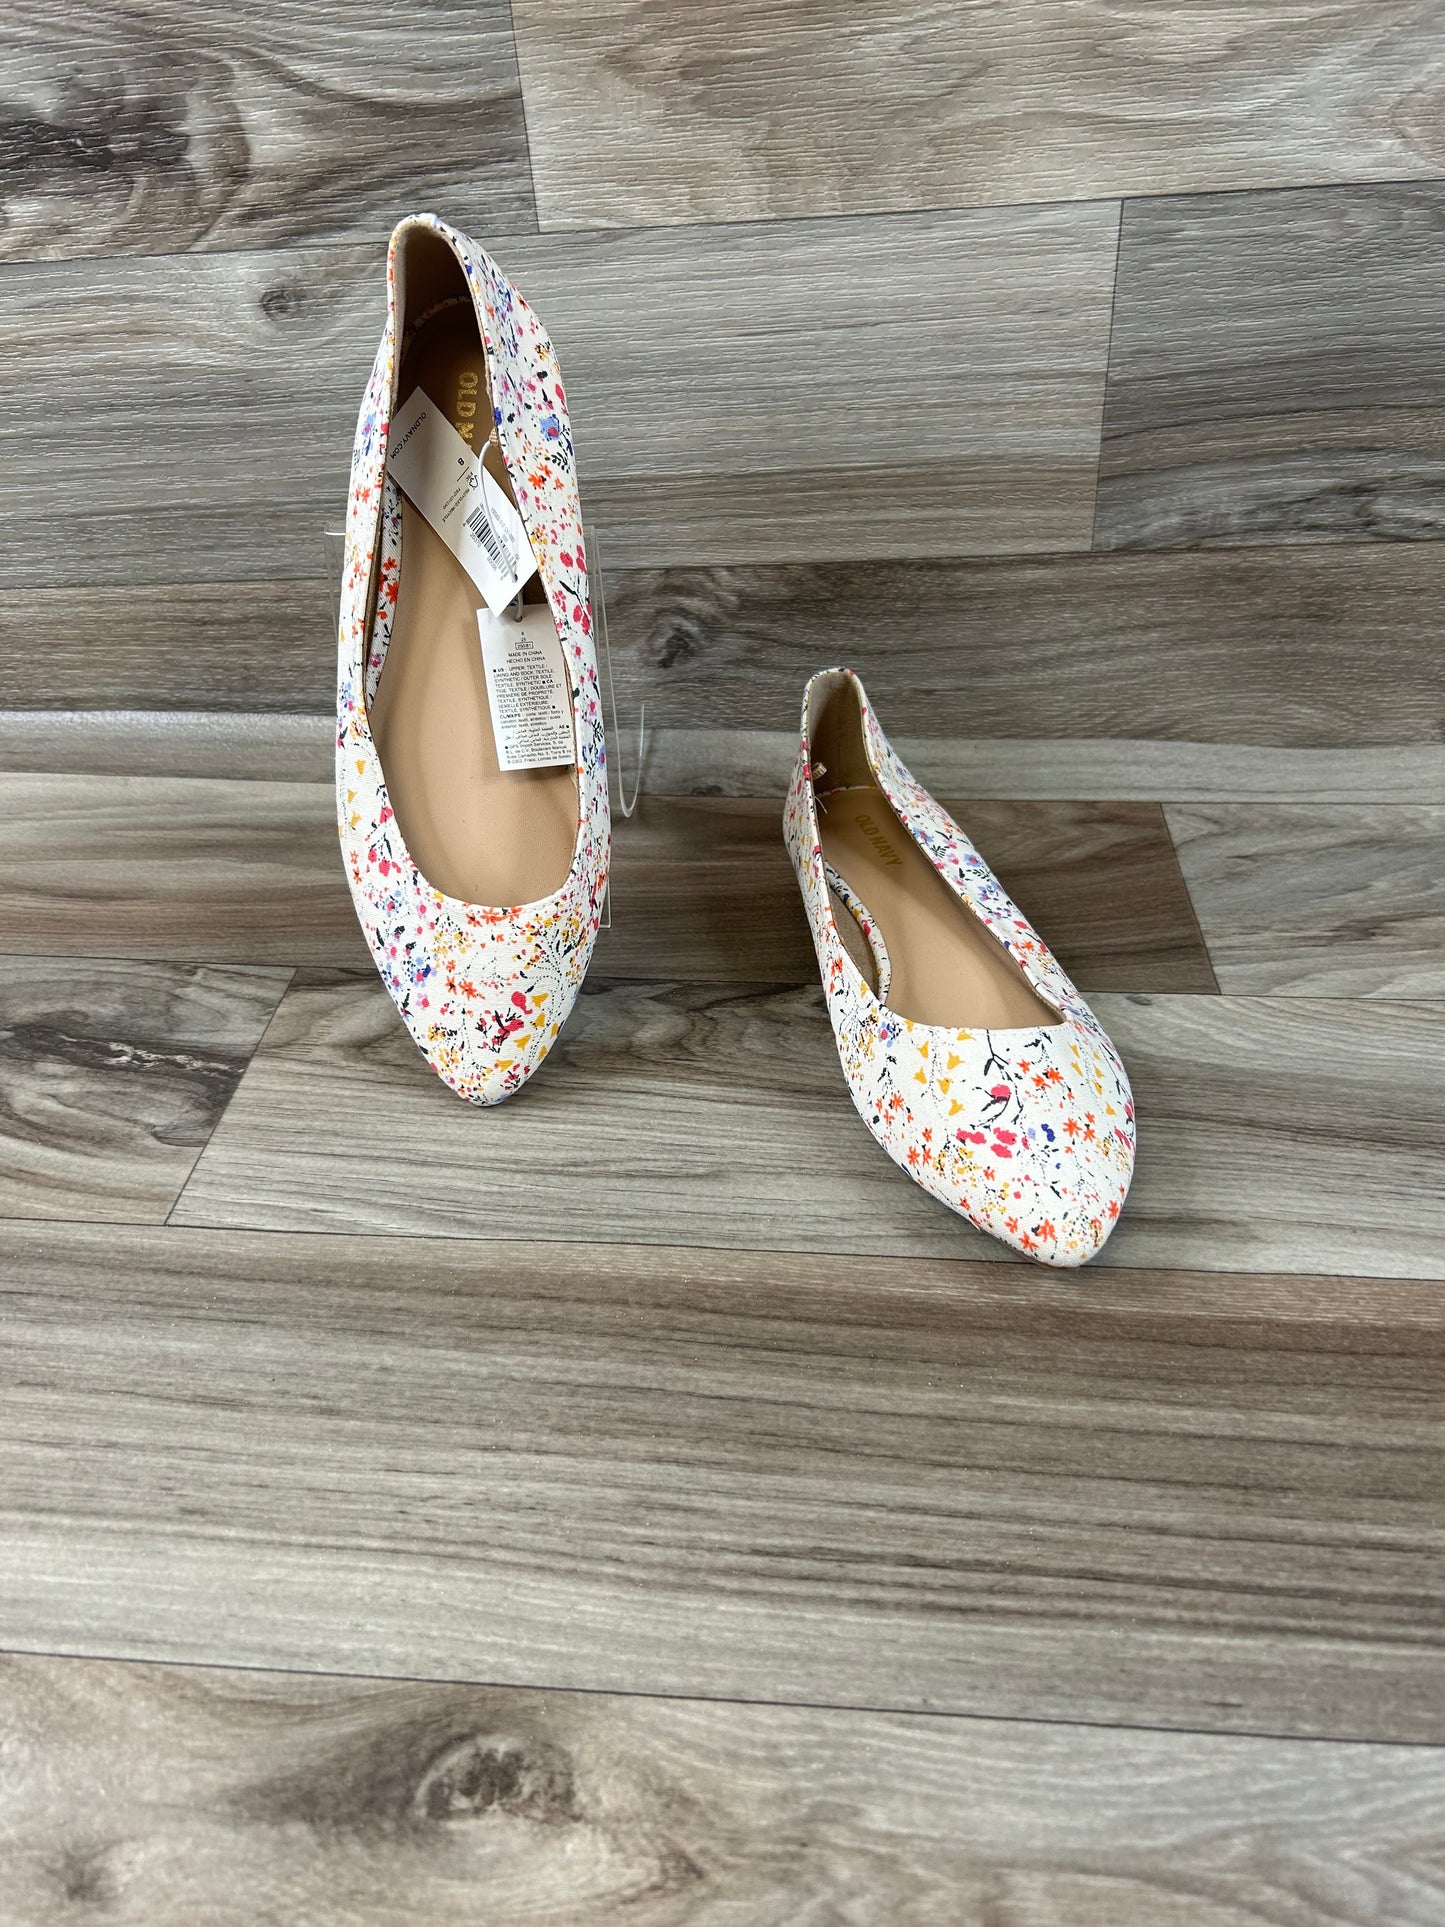 Floral Print Shoes Flats Old Navy, Size 8